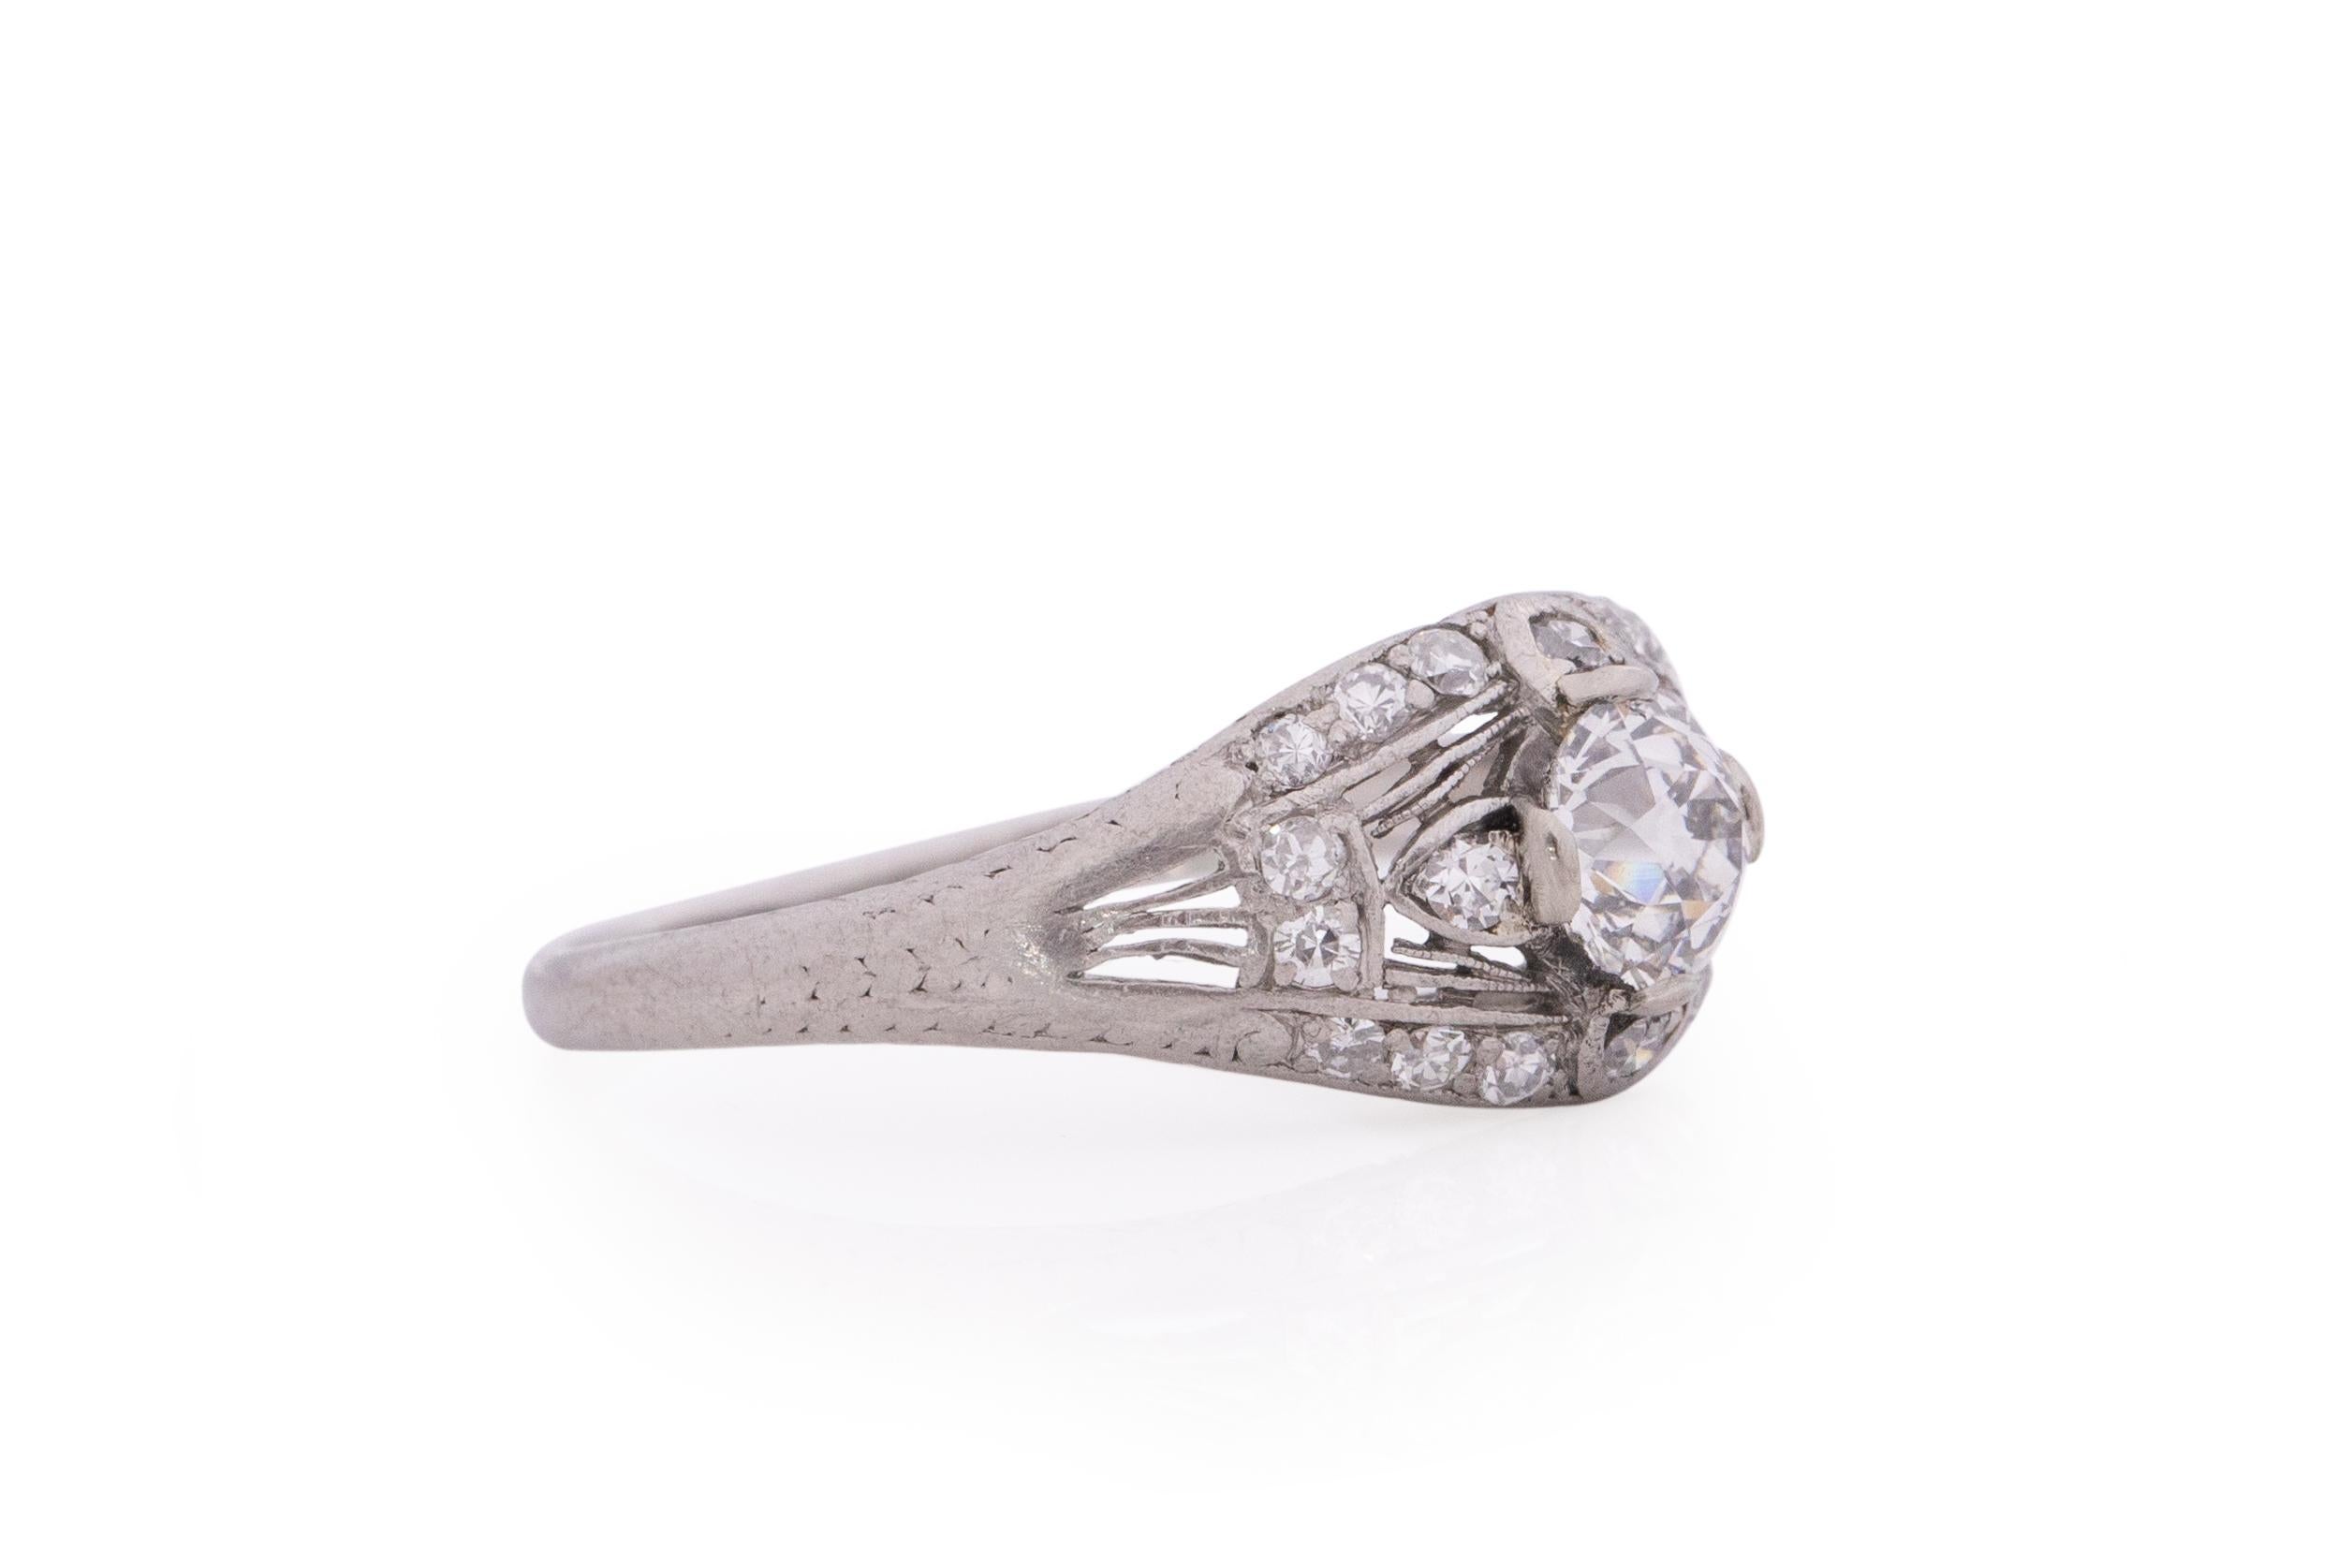 Item Details: 
Ring Size: 7
Metal Type: Platinum [Hallmarked, and Tested]
Weight: 3.0 grams

Center Diamond Details:
GIA REPORT #: 6197854523
Weight: .60 Carat
Cut: Old European brilliant
Color: H
Clarity: VS2
Measurements: 5.27x 5.23 x 3.52

Side